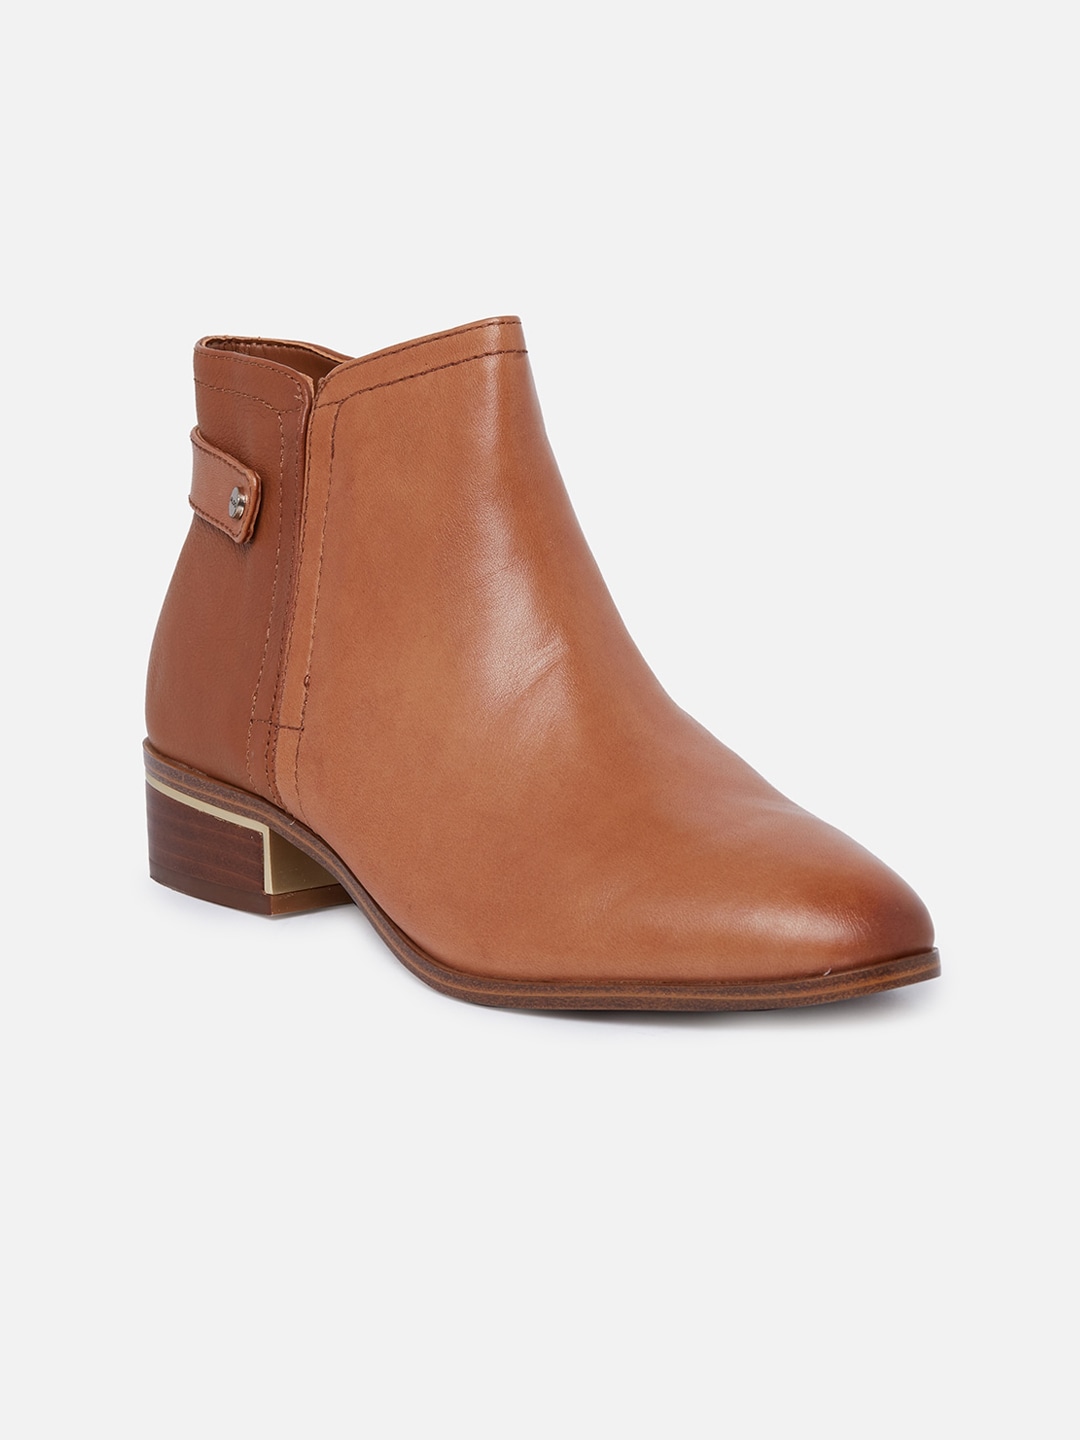 ALDO Women Camel Brown Solid Leather Mid-Top Flat Boots Price in India